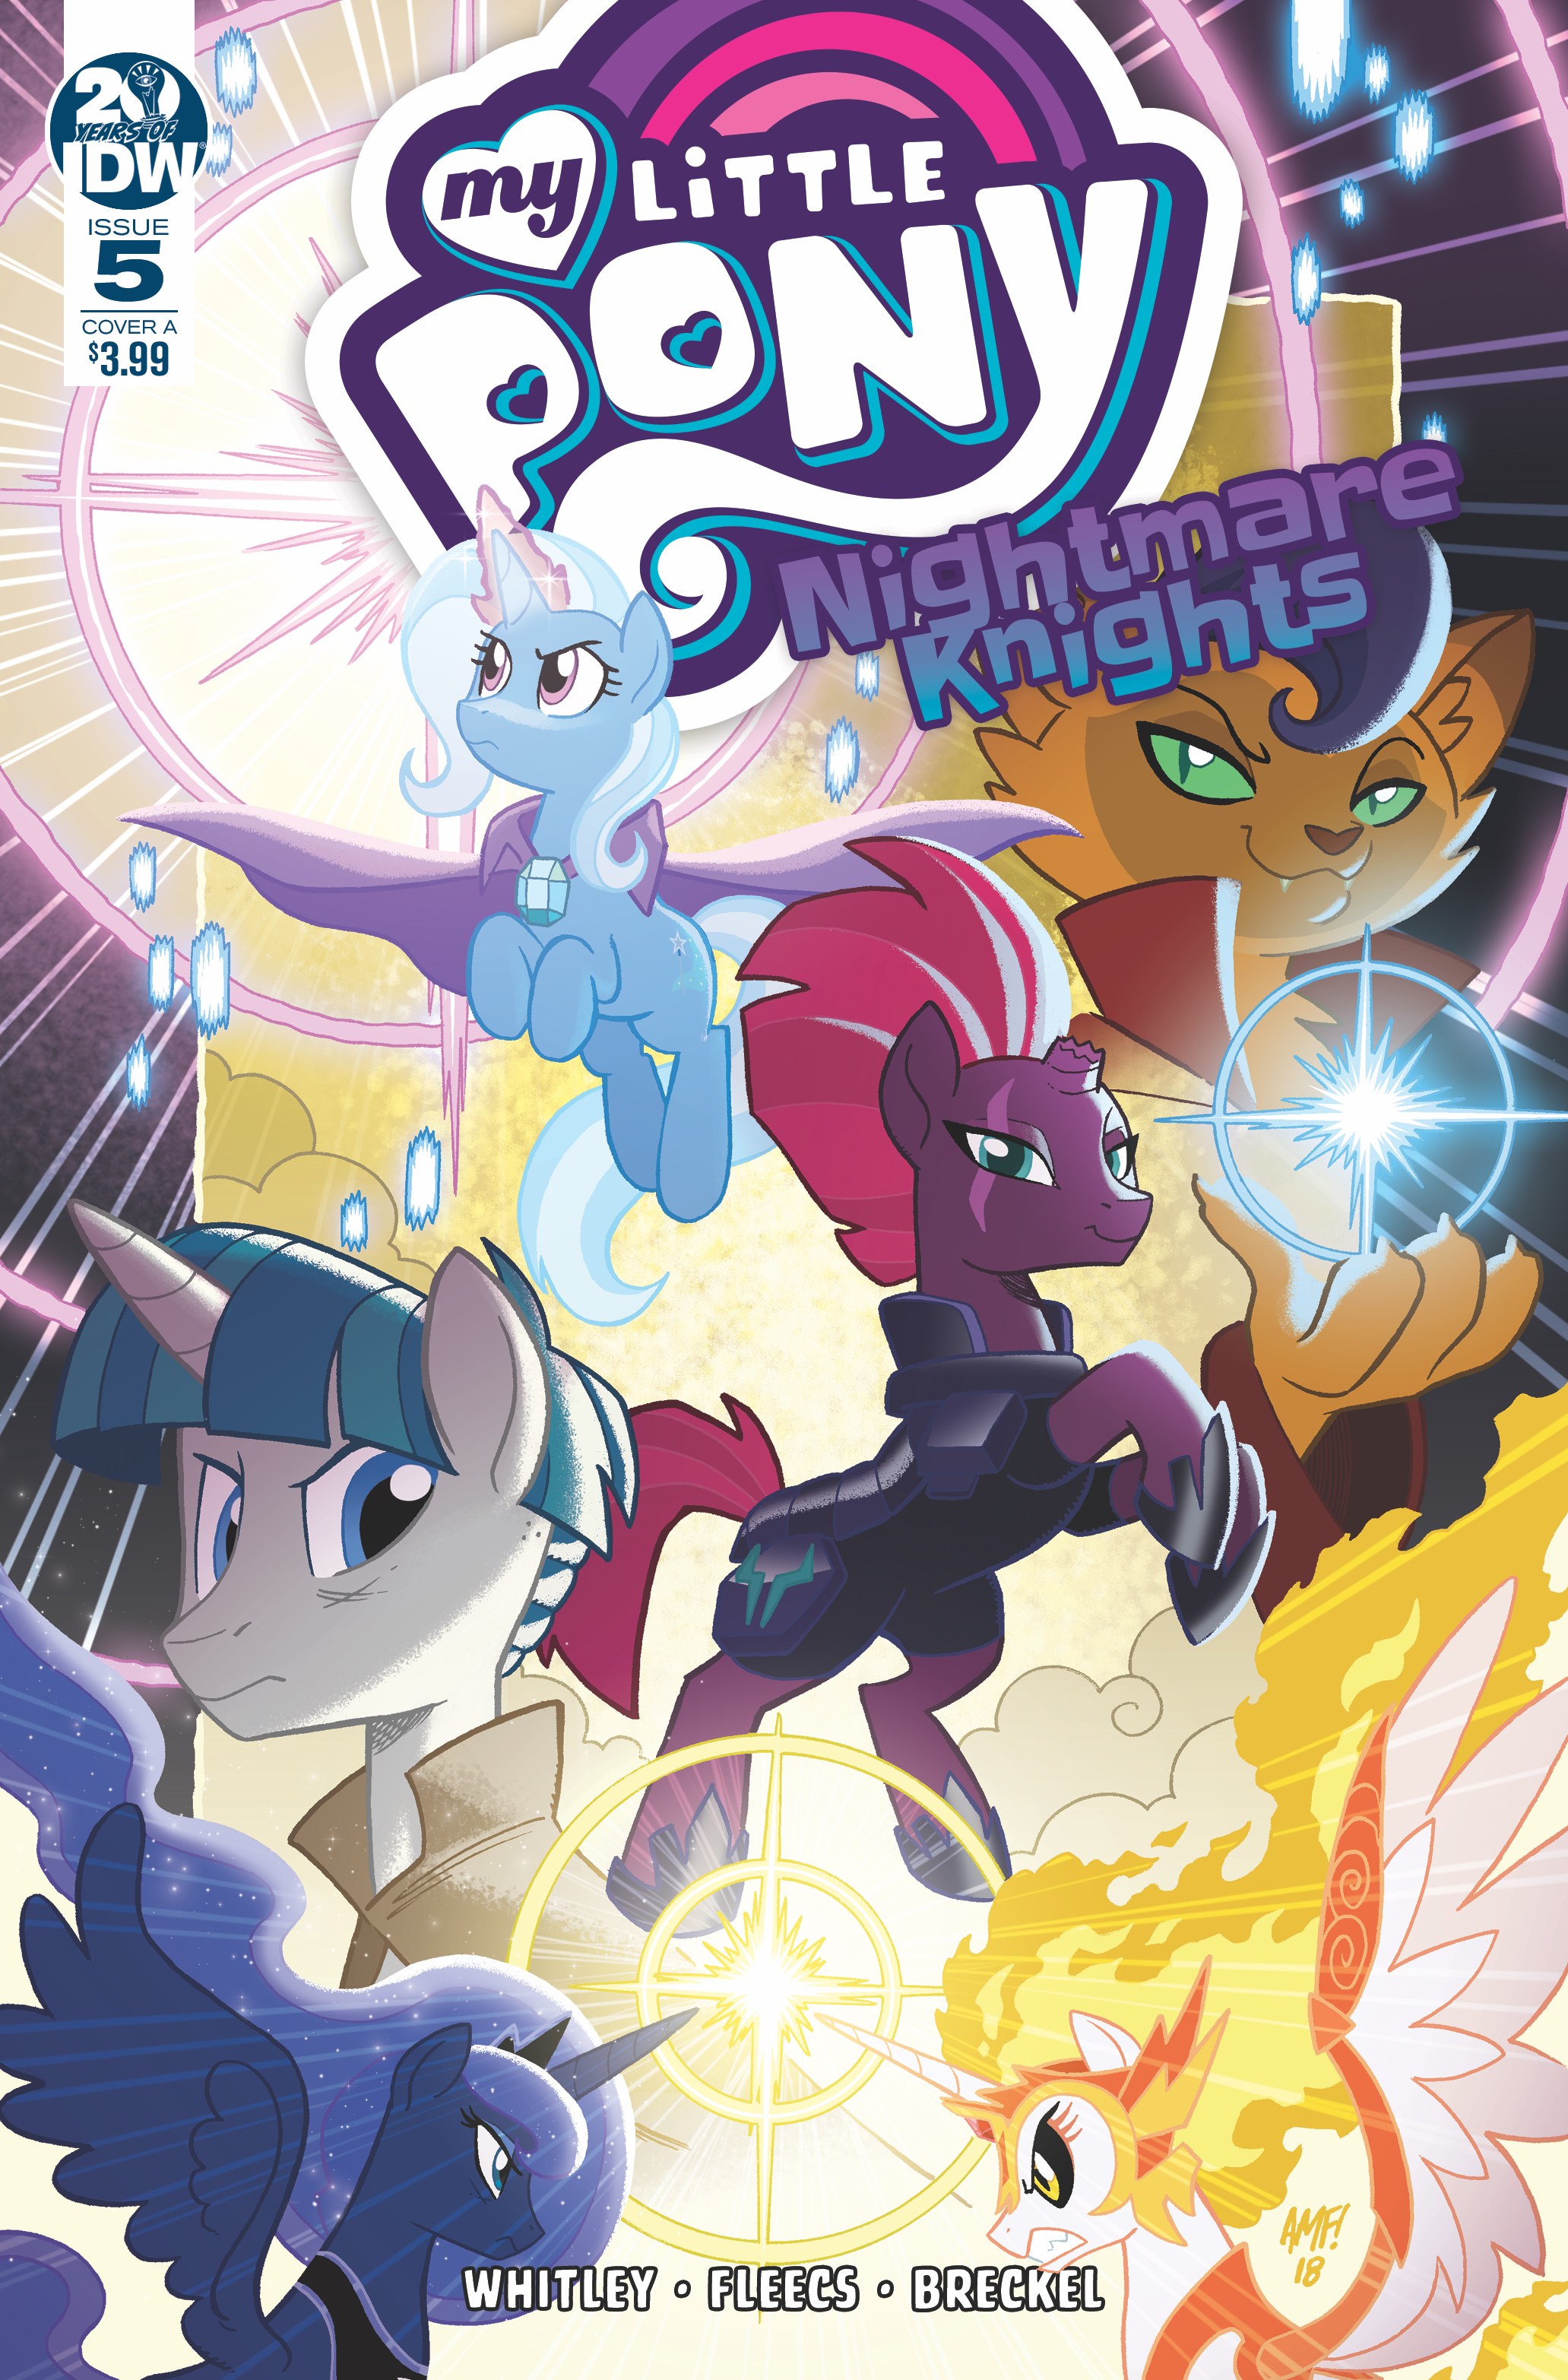 Nightmare Knights Issue 5 | My Little Pony Friendship is Magic 